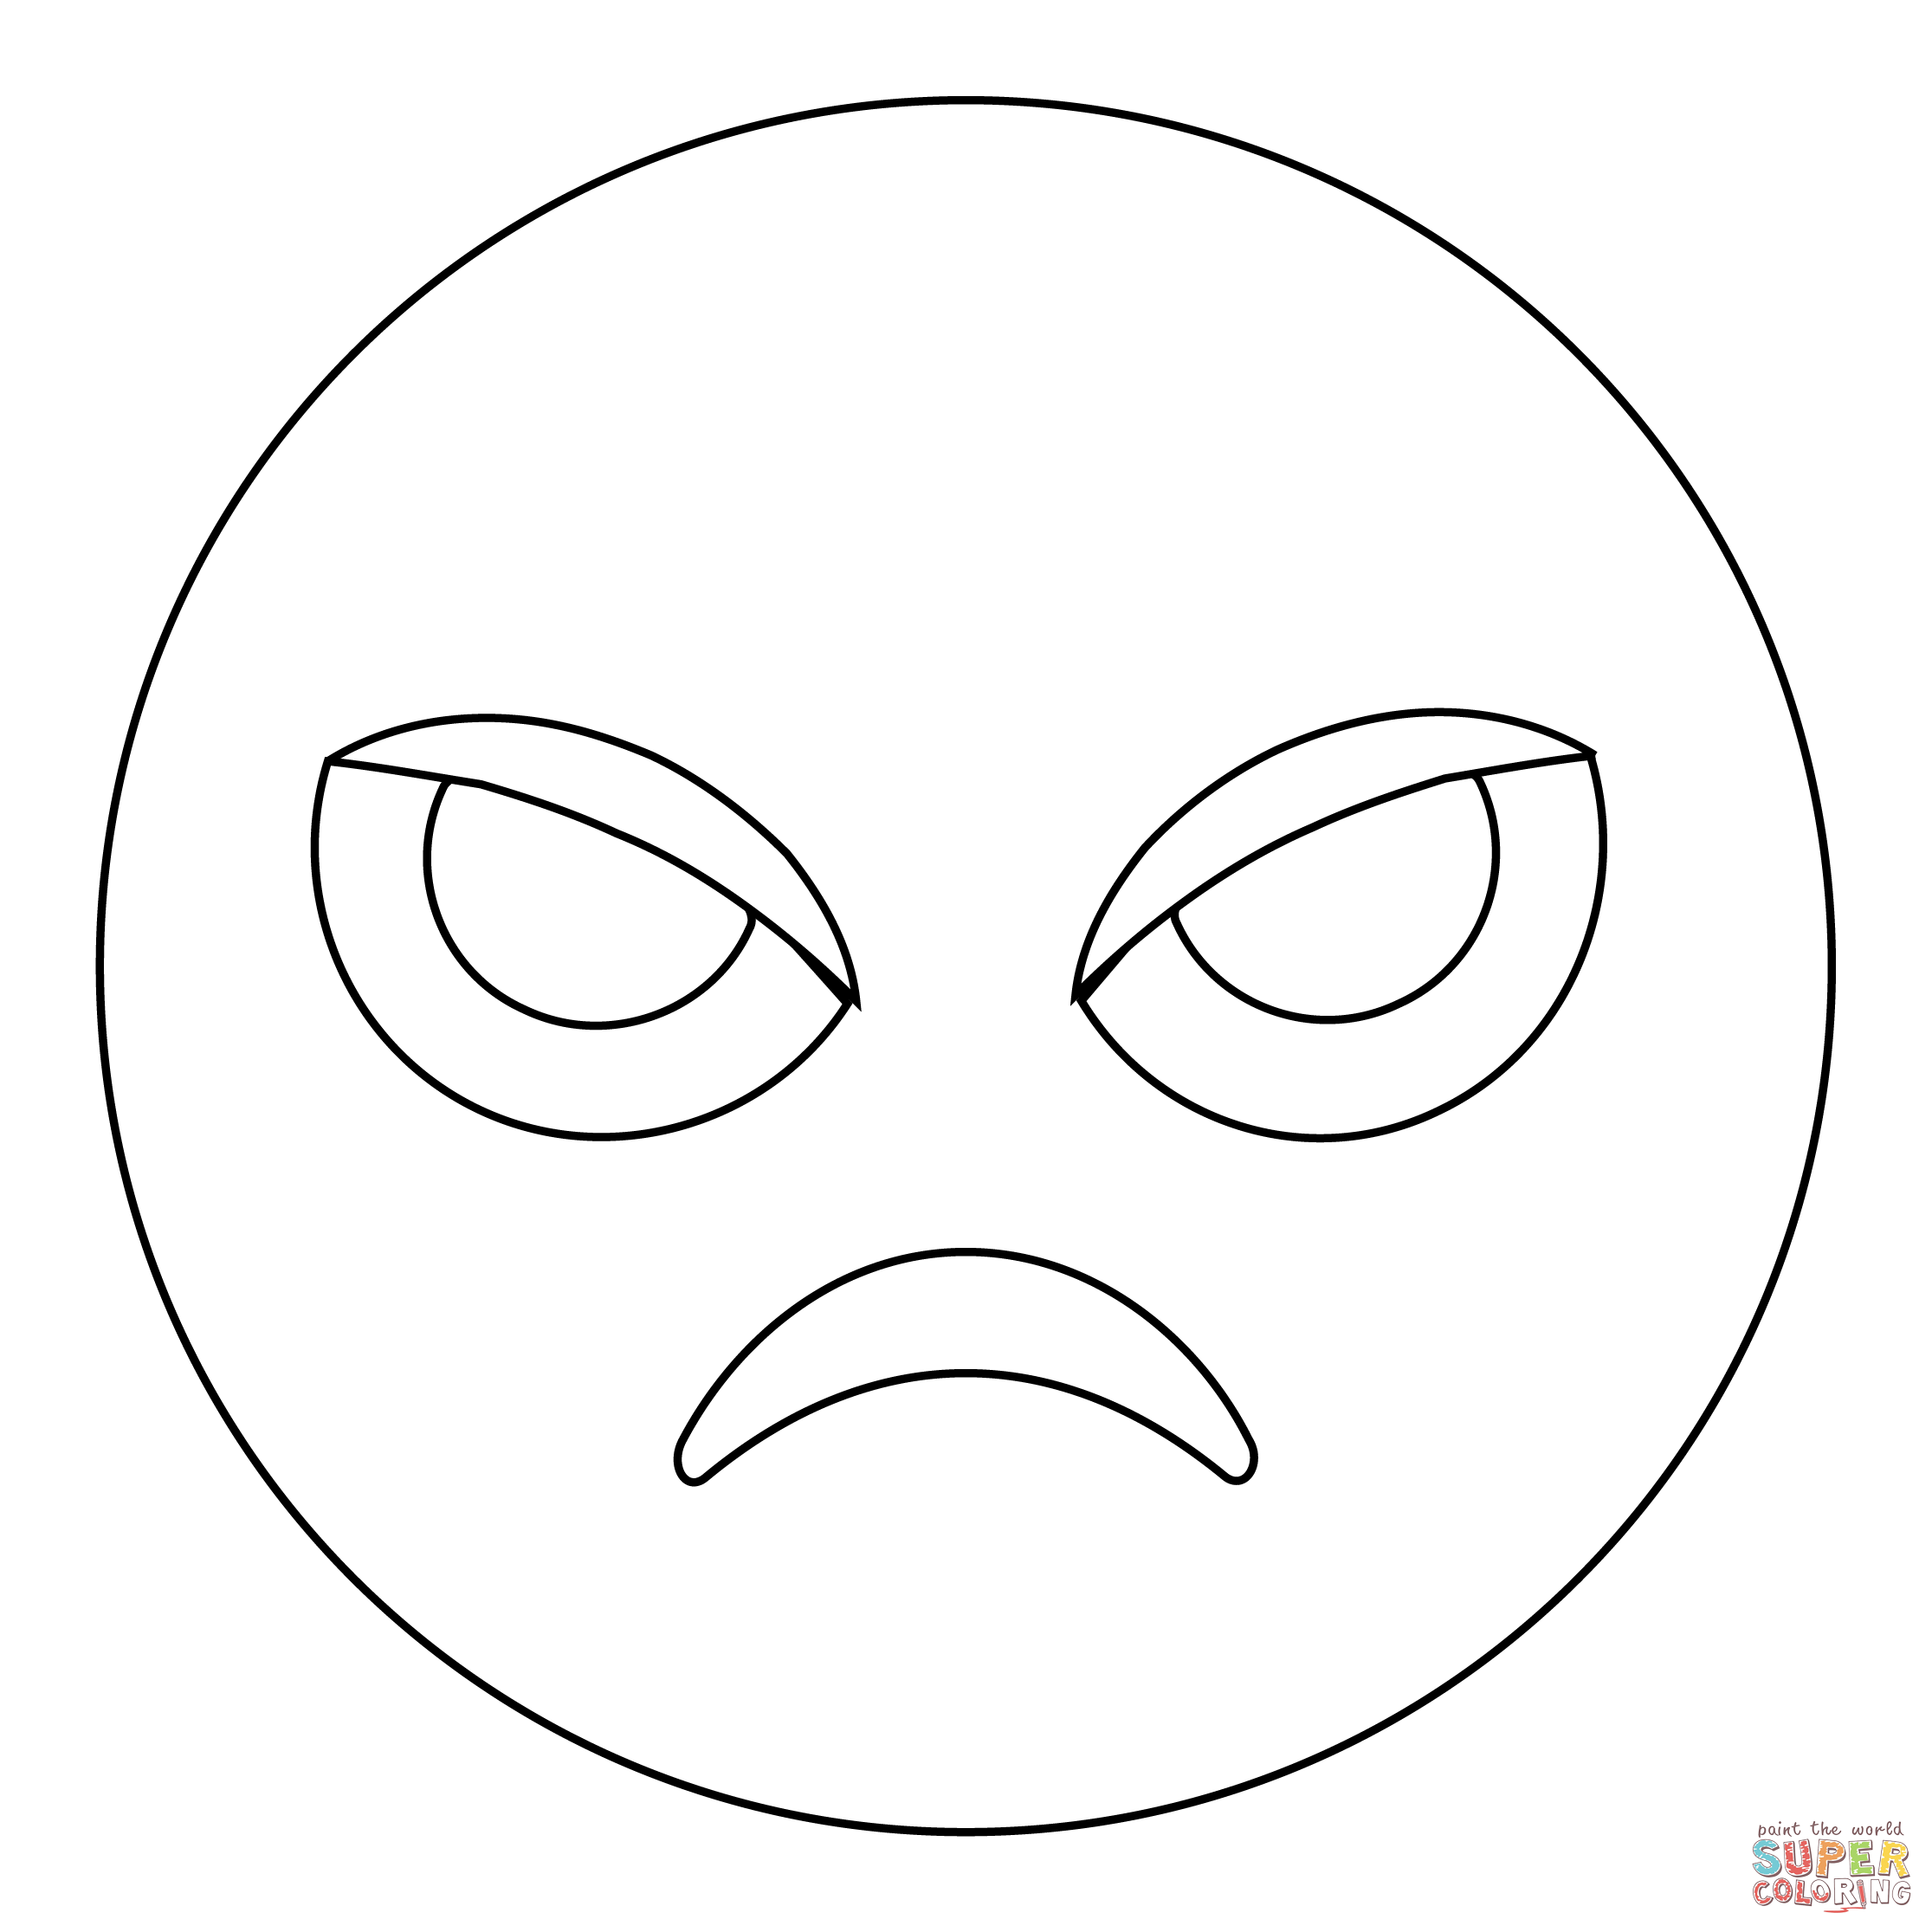 Angry face coloring page free printable coloring pages